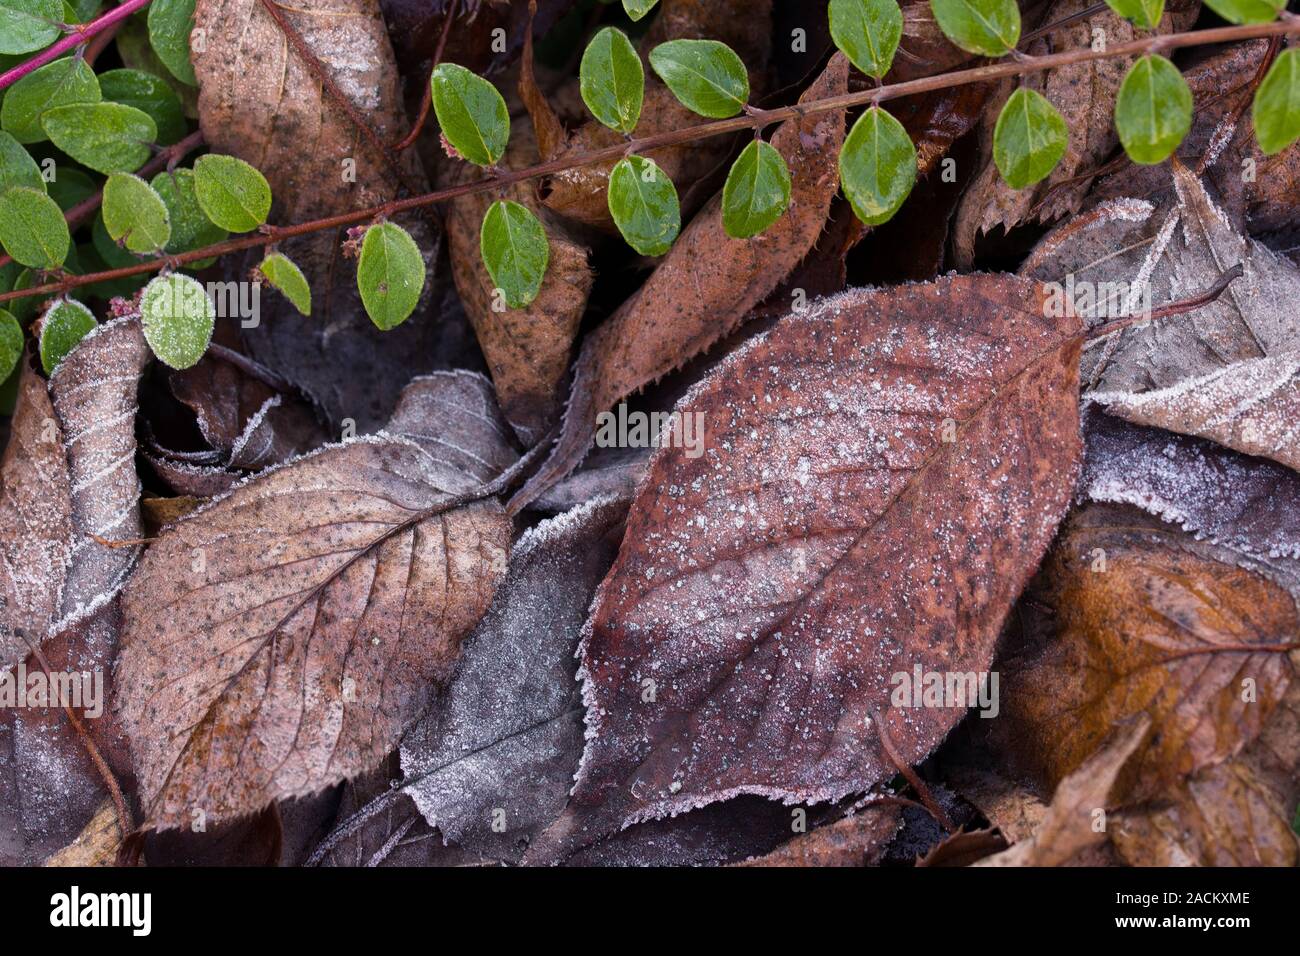 Background mixed with frozen european beech leaves (Fagus sylvatica) and cotoneaster branches Stock Photo